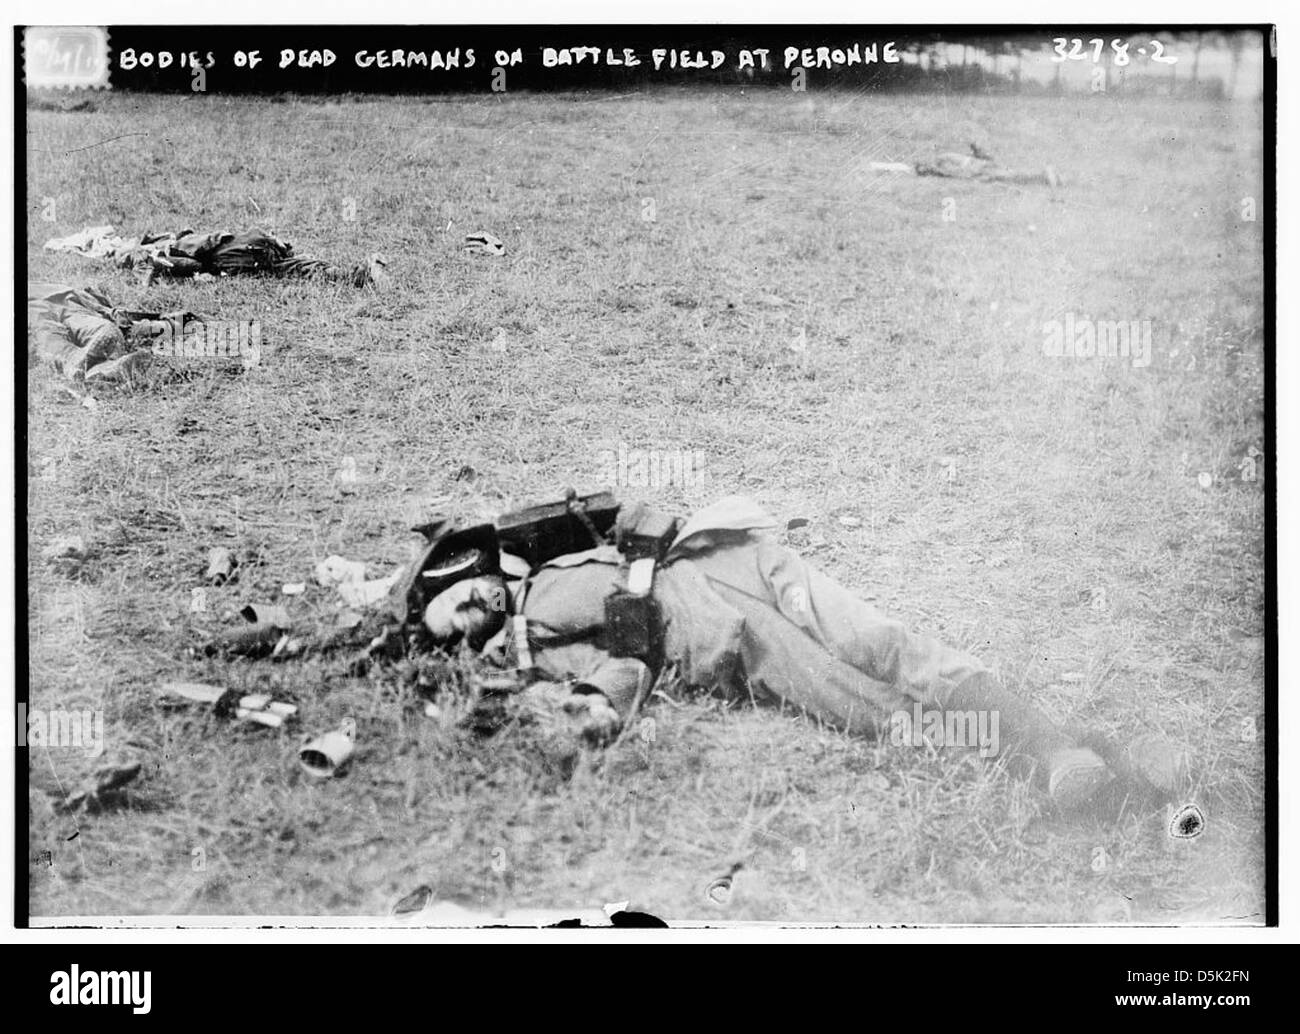 Bodies of dead Germans on battle field at Peronne (LOC) Stock Photo